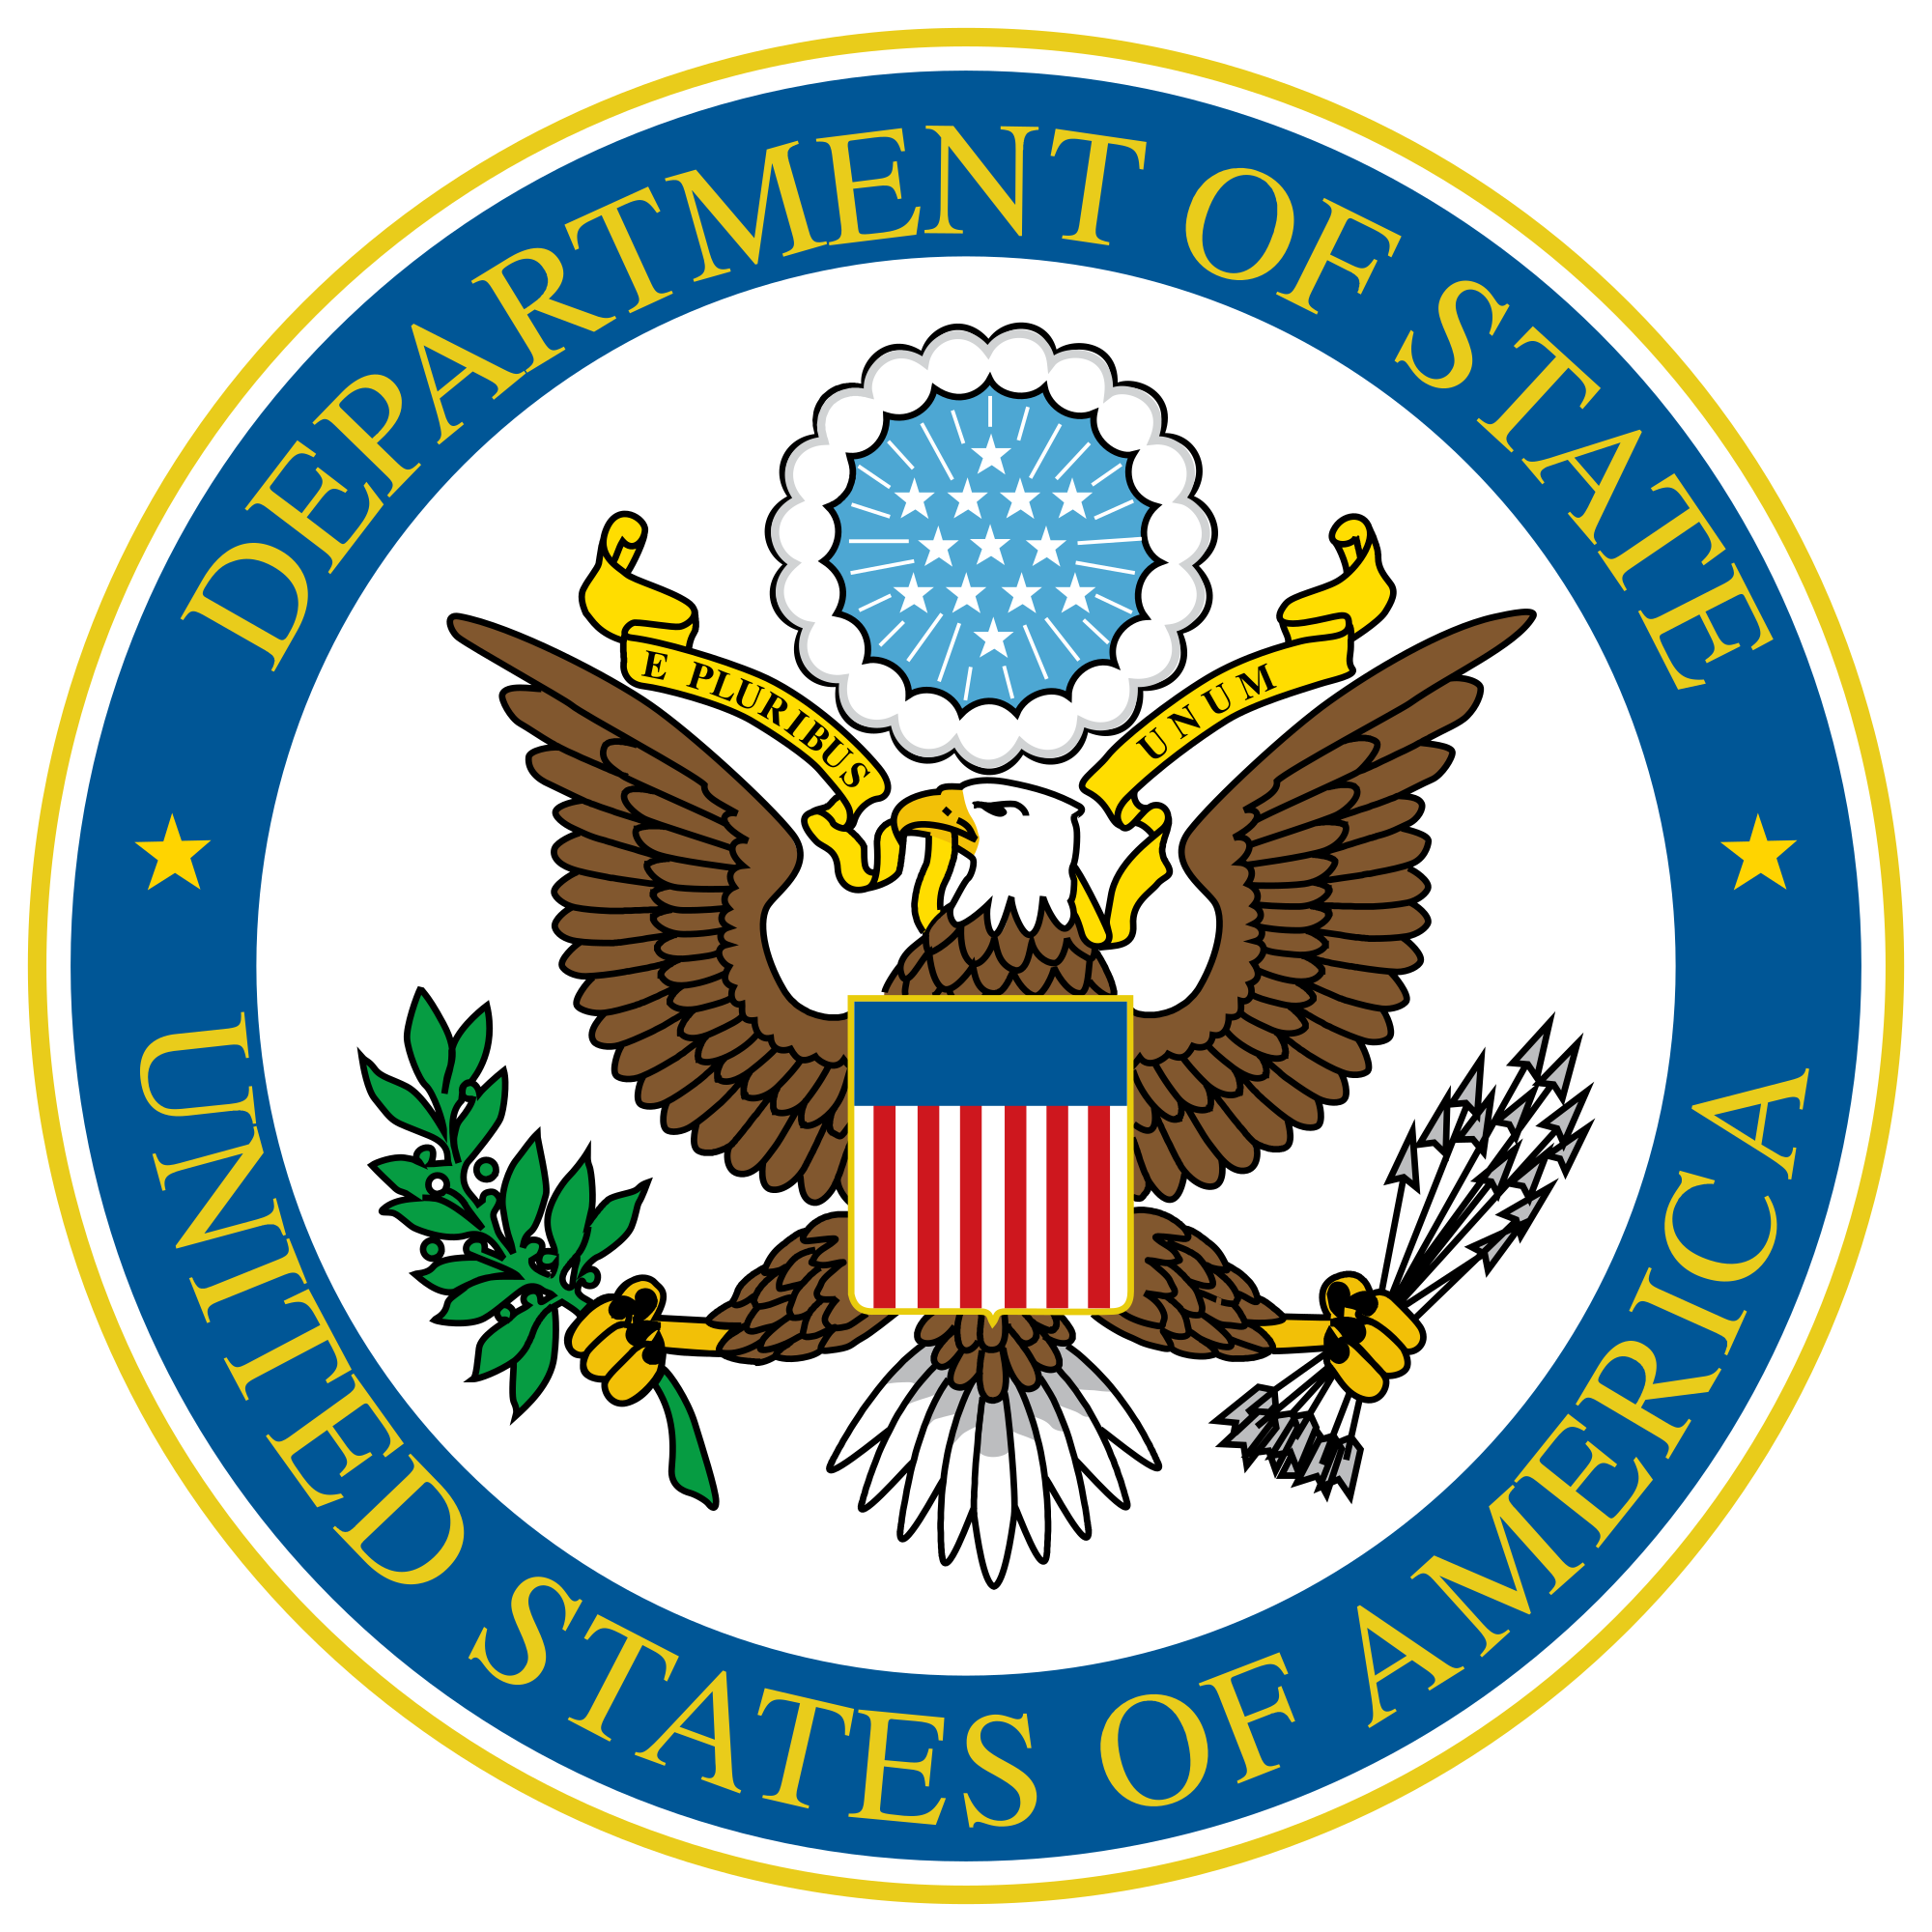 united states clipart strong state government